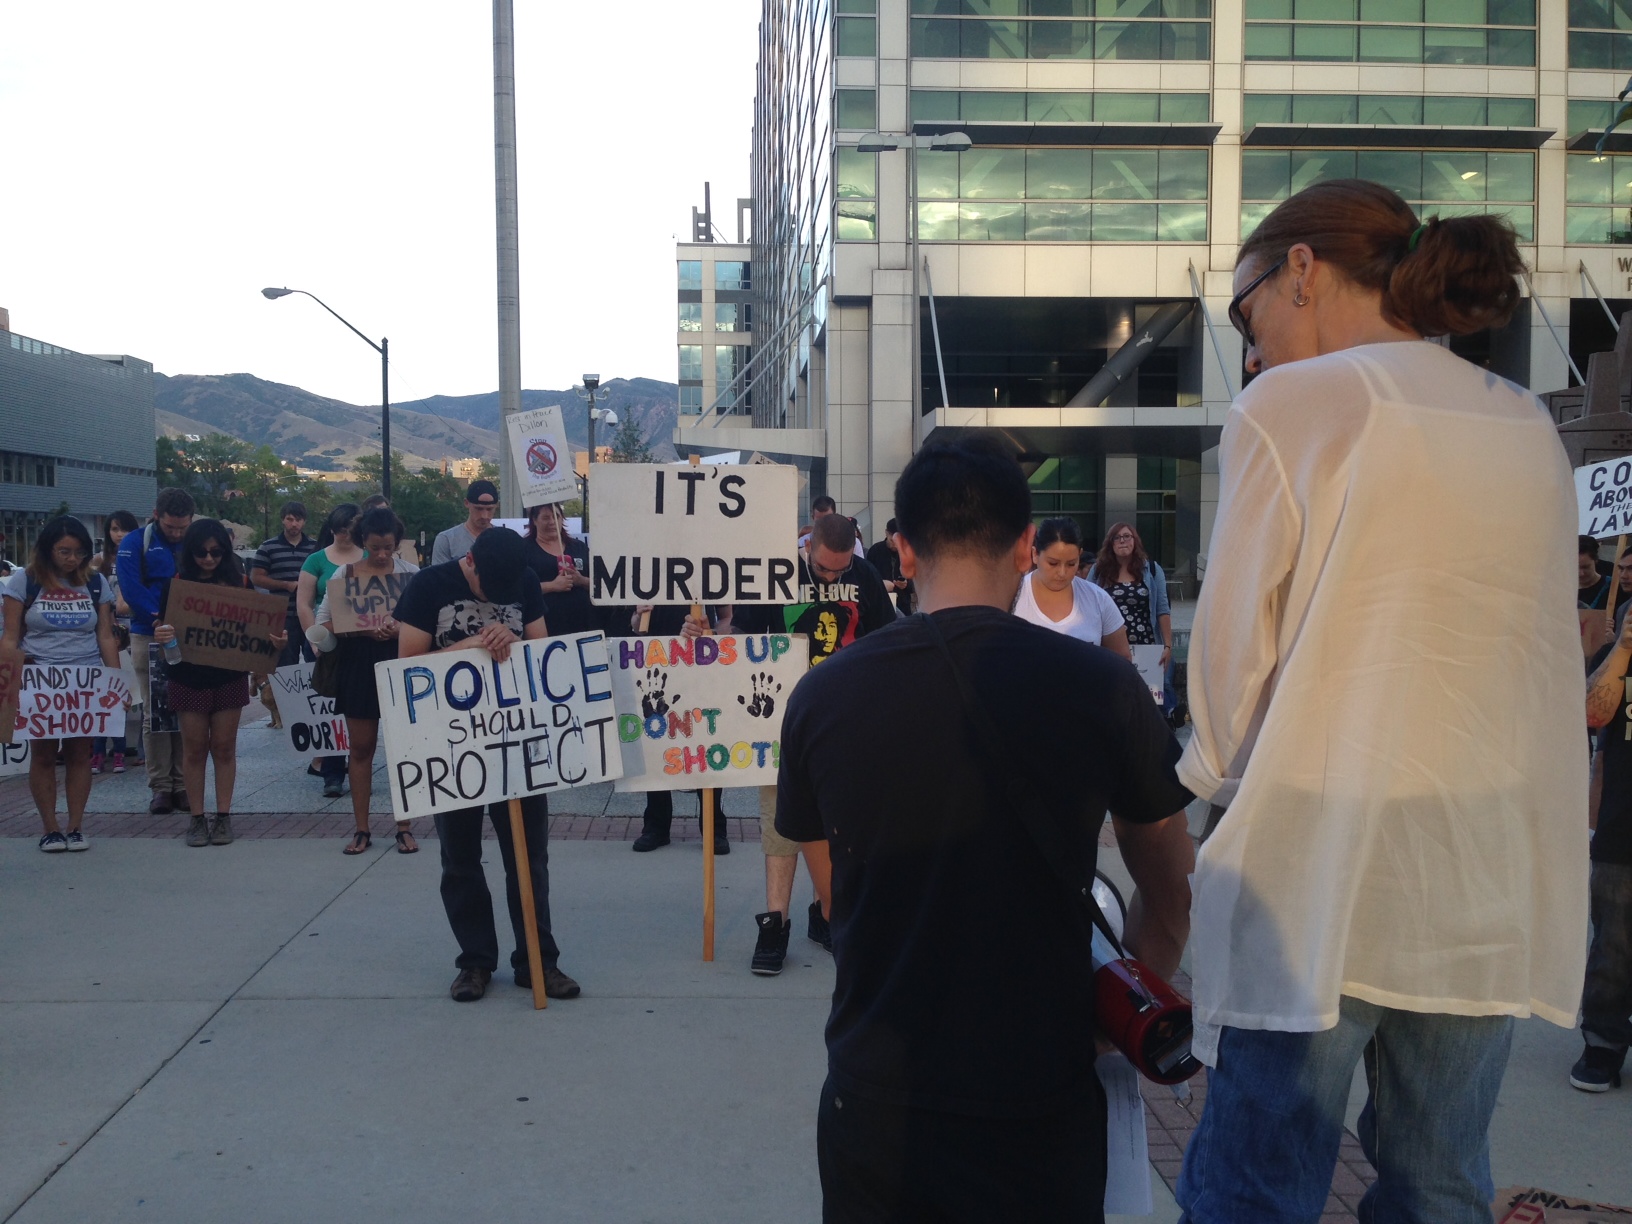 Protestors take a moment of silence during a protest against aggressive police tactics on August 20, 2014.